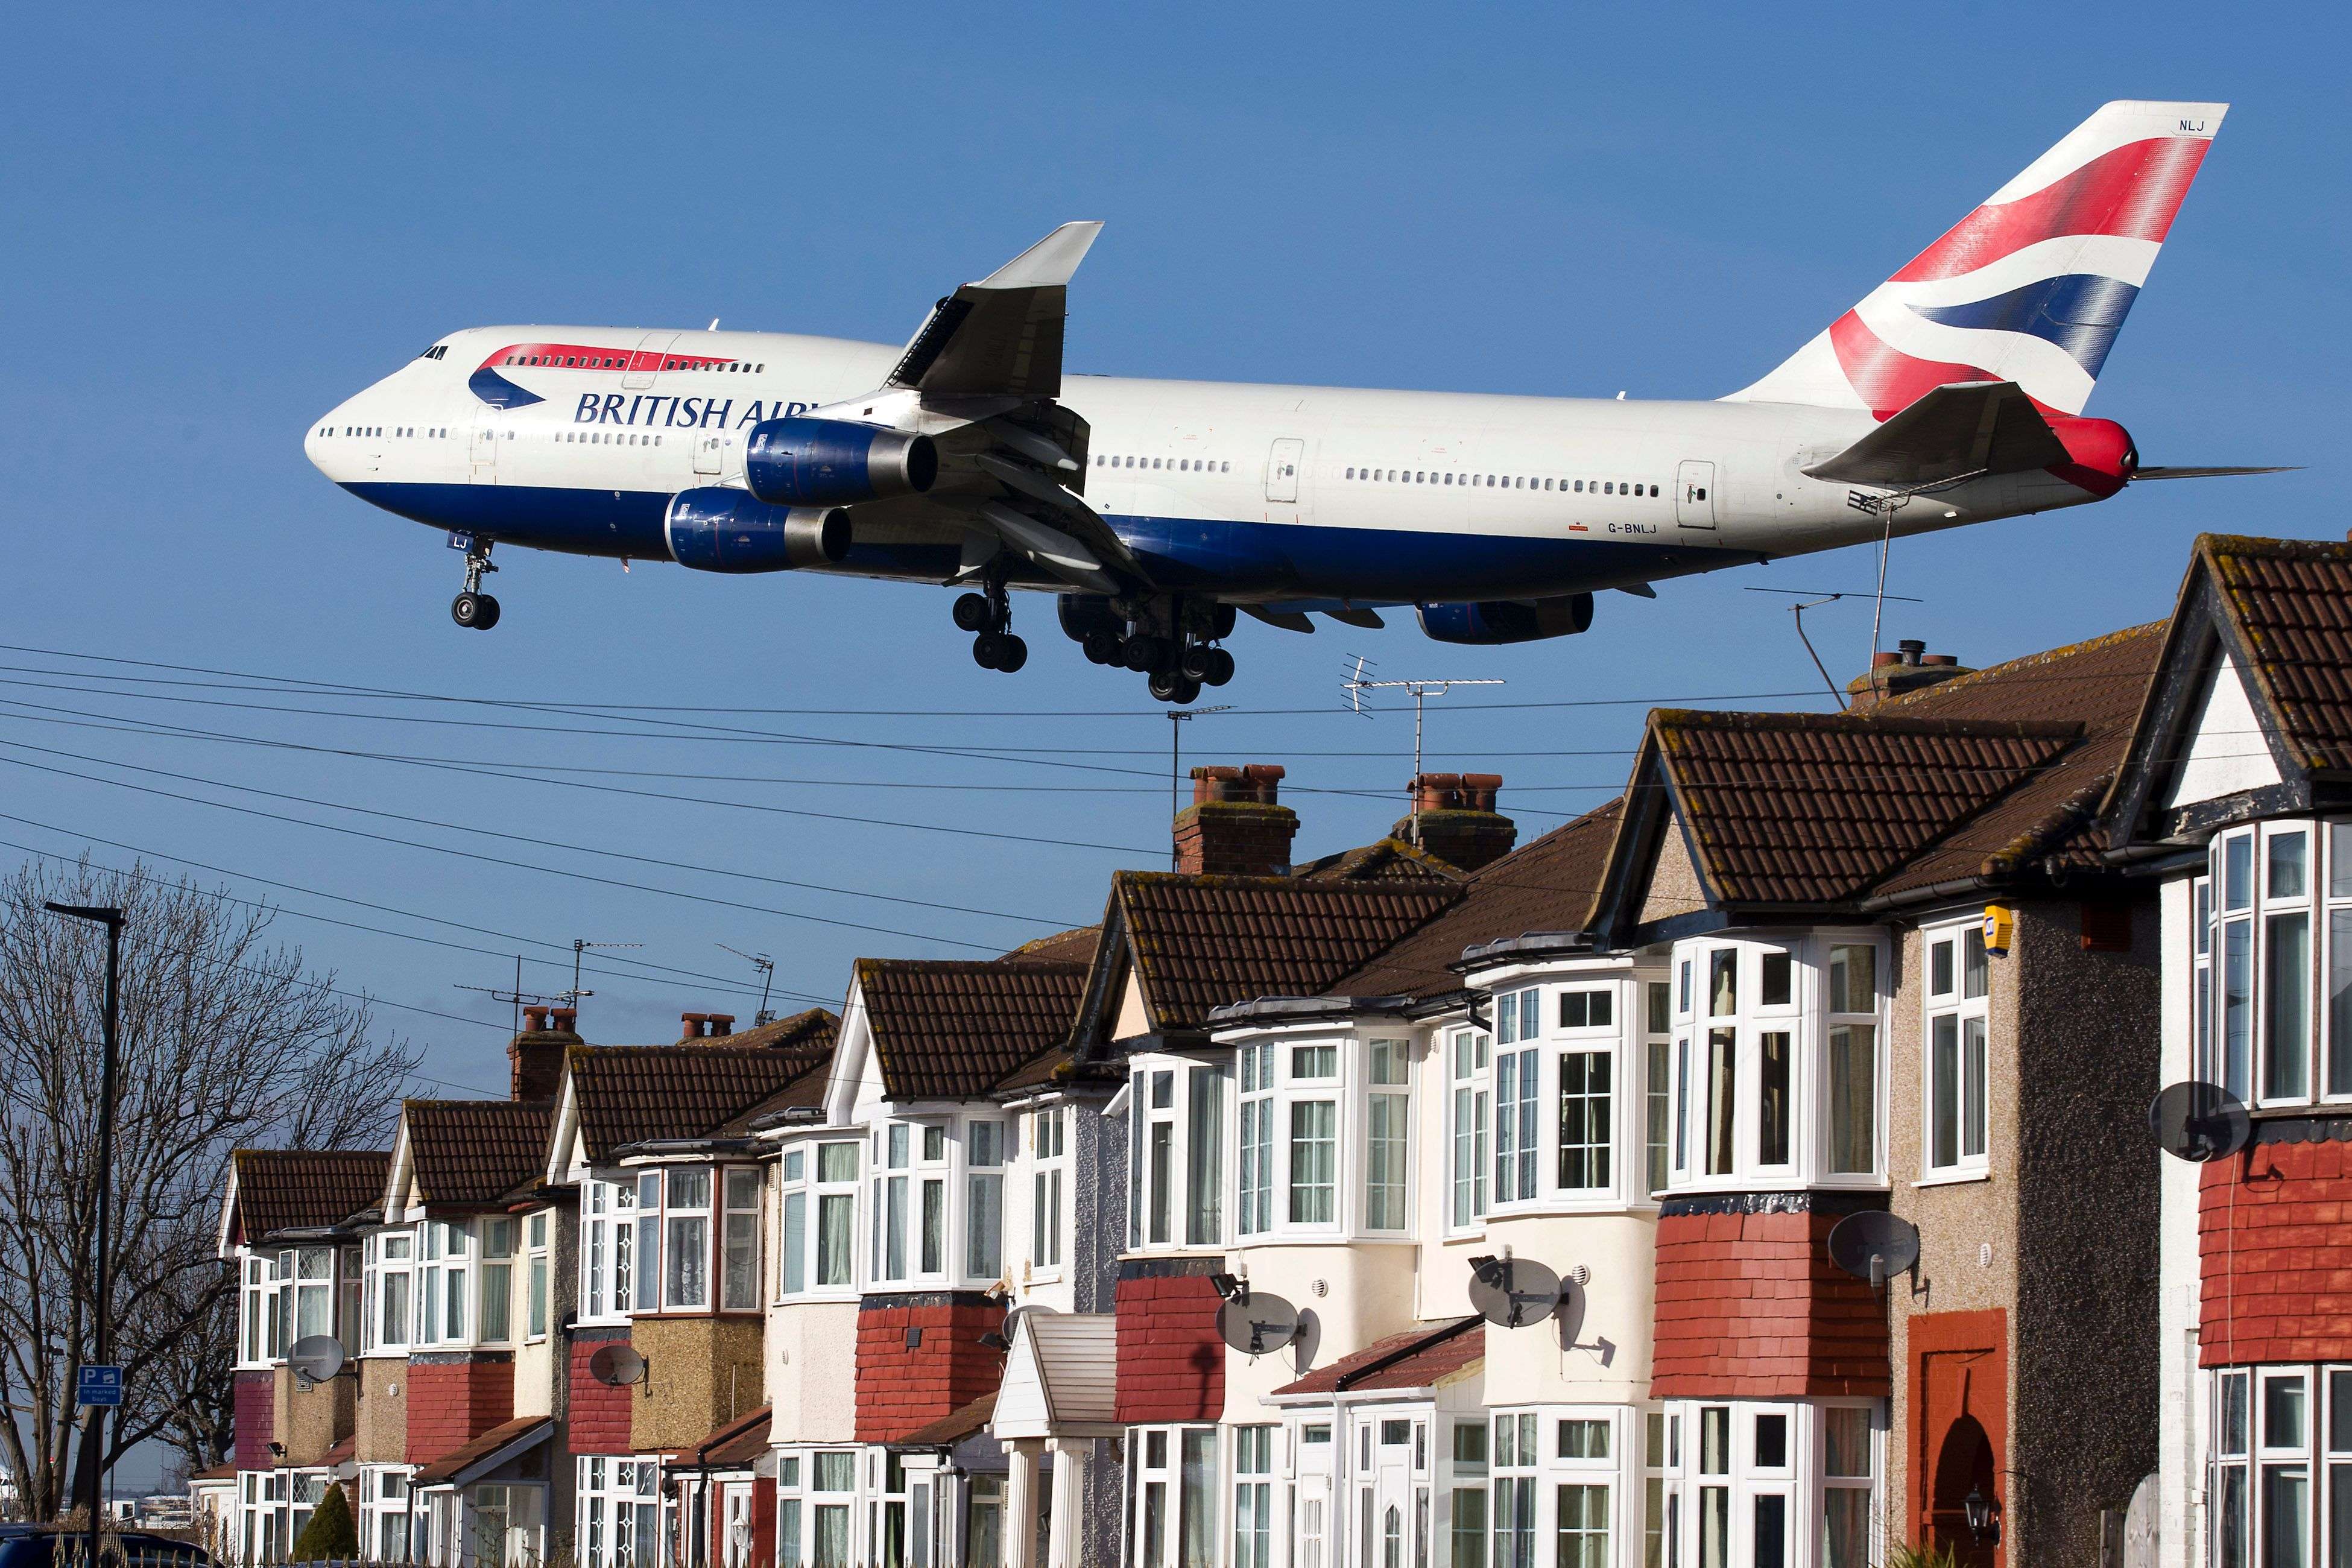 A British Airways 747 comes into land at Heathrow Airport in West London in 2015. Britain was famed in the 19th century as a maritime power. It now has a real opportunity to become one of the leading global aviation powers, with direct commercial benefits to UK business. Photo: AFP